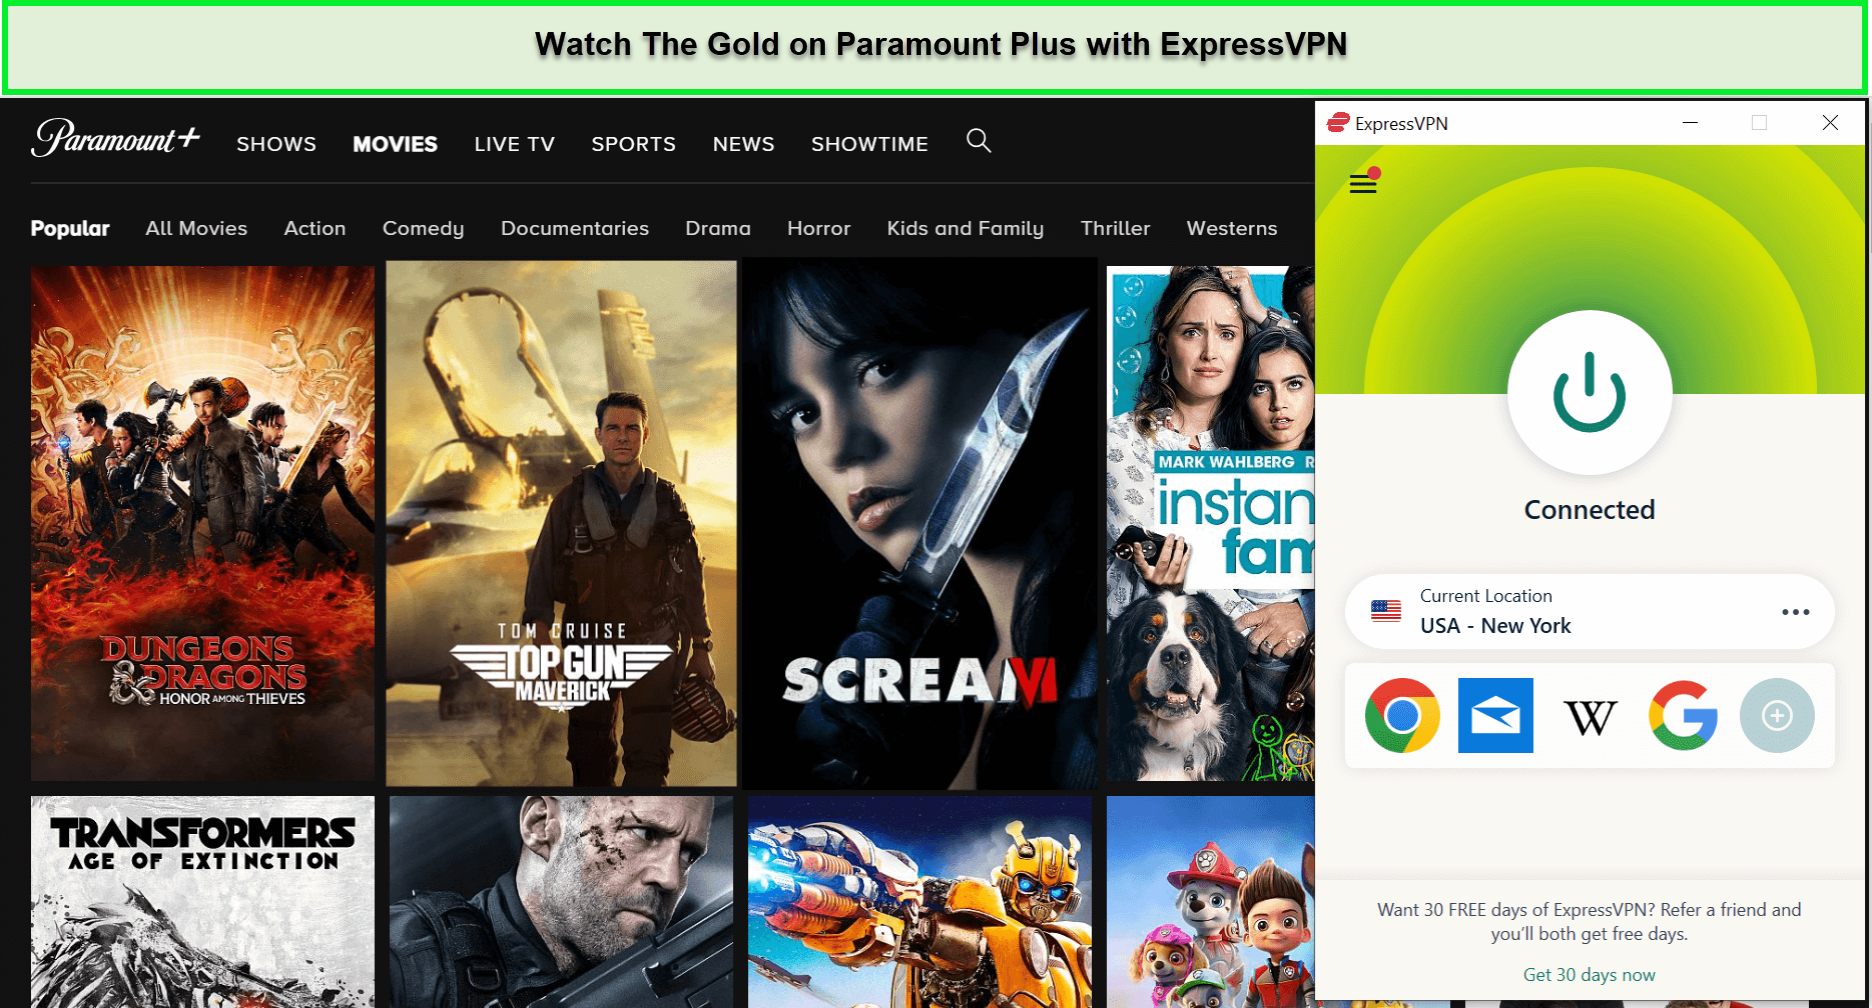 Watch-The-Gold-in-UAE-on-Paramount-Plus-with-ExpressVPN